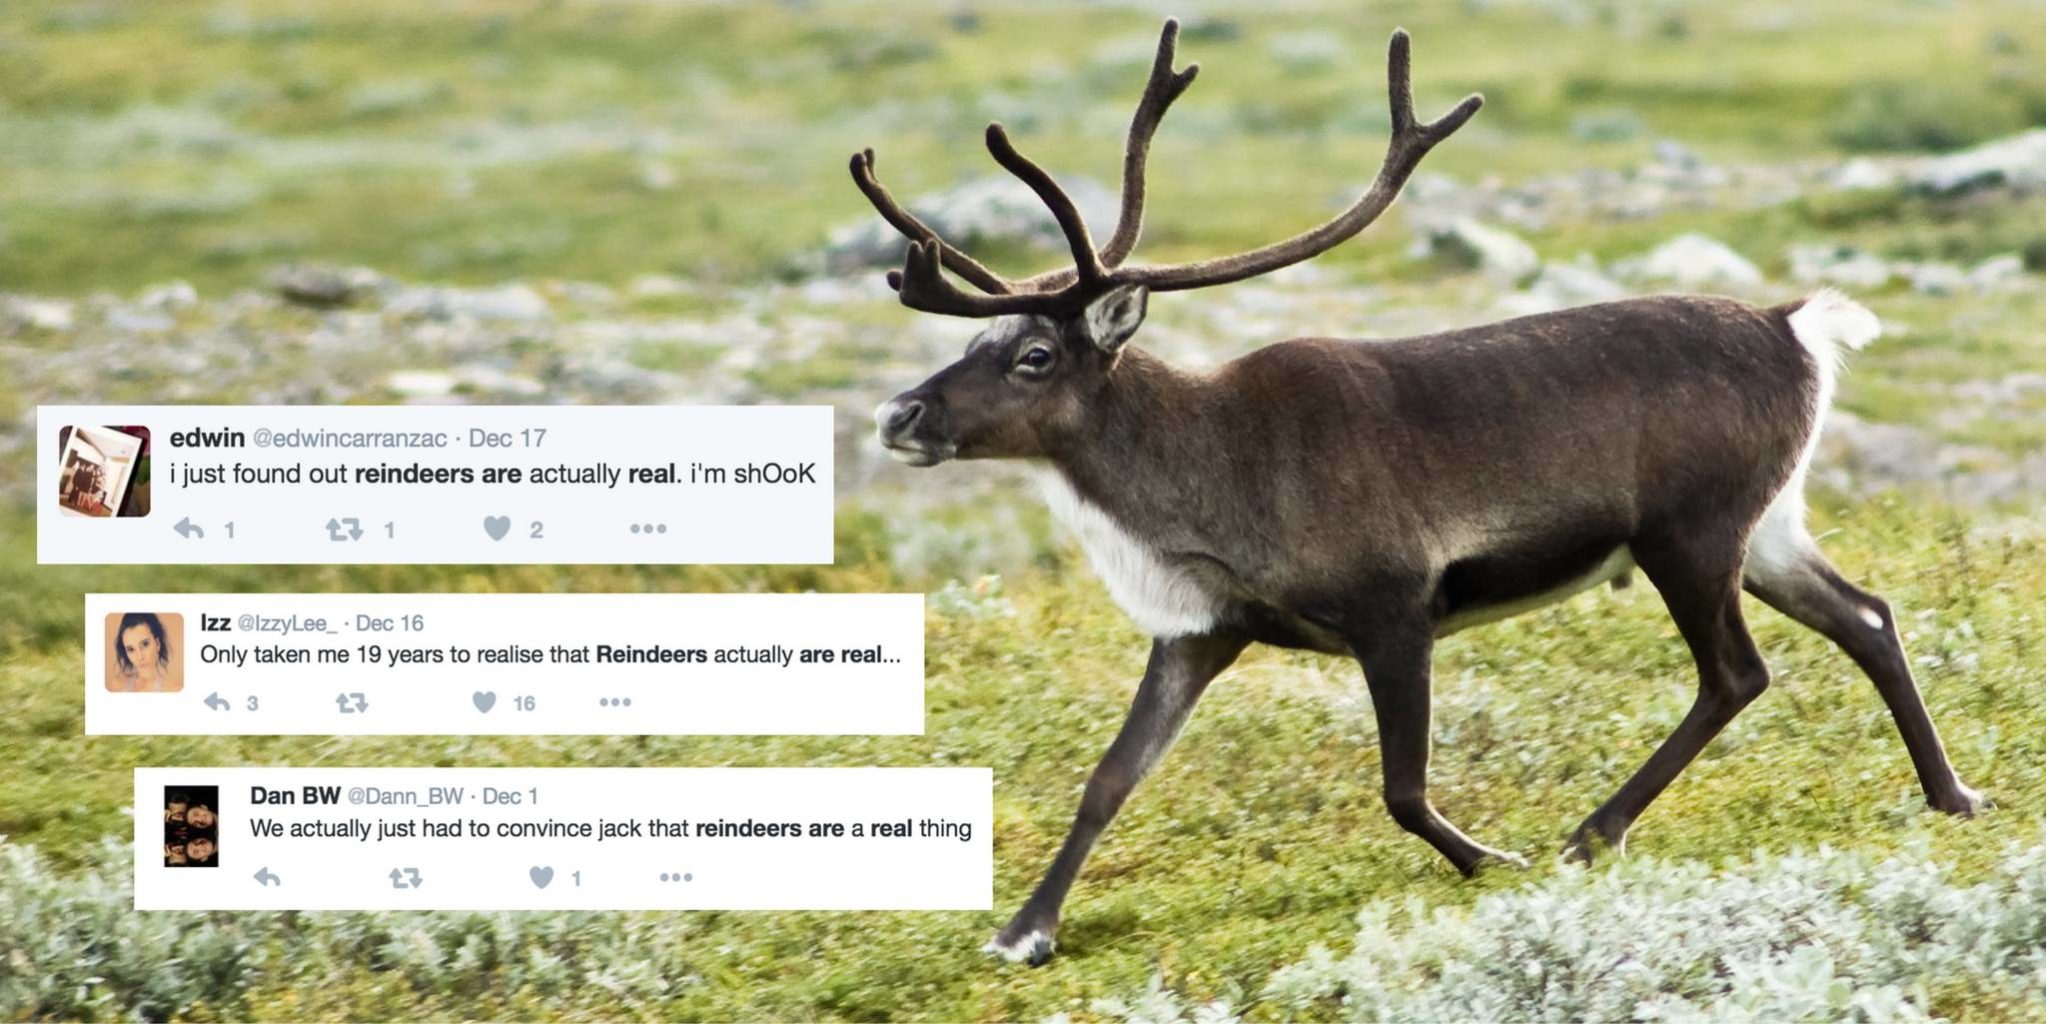 People are just now finding out that reindeer are real | The Daily Dot